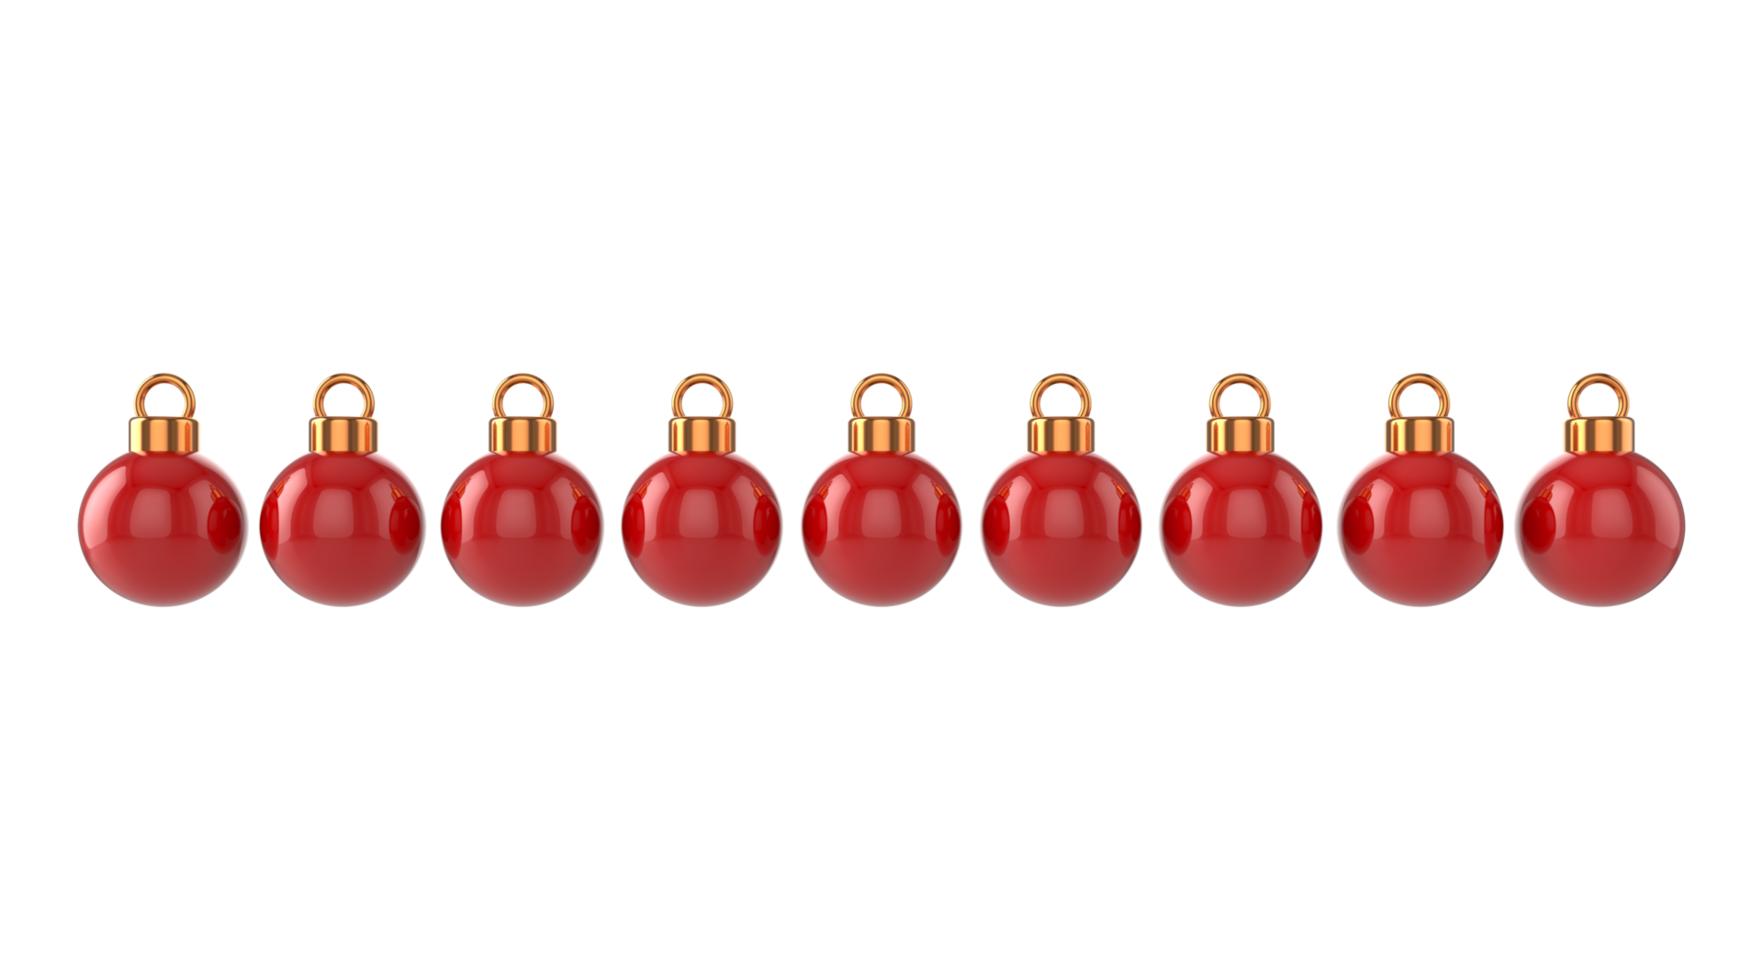 Festive Season balls baubles bombs bulbs decoration Transparent PNG. isolated glass ball. 3D rendering. New Year's Eve winter hanging adornment souvenir. Traditional ornament happy wintertime holidays png